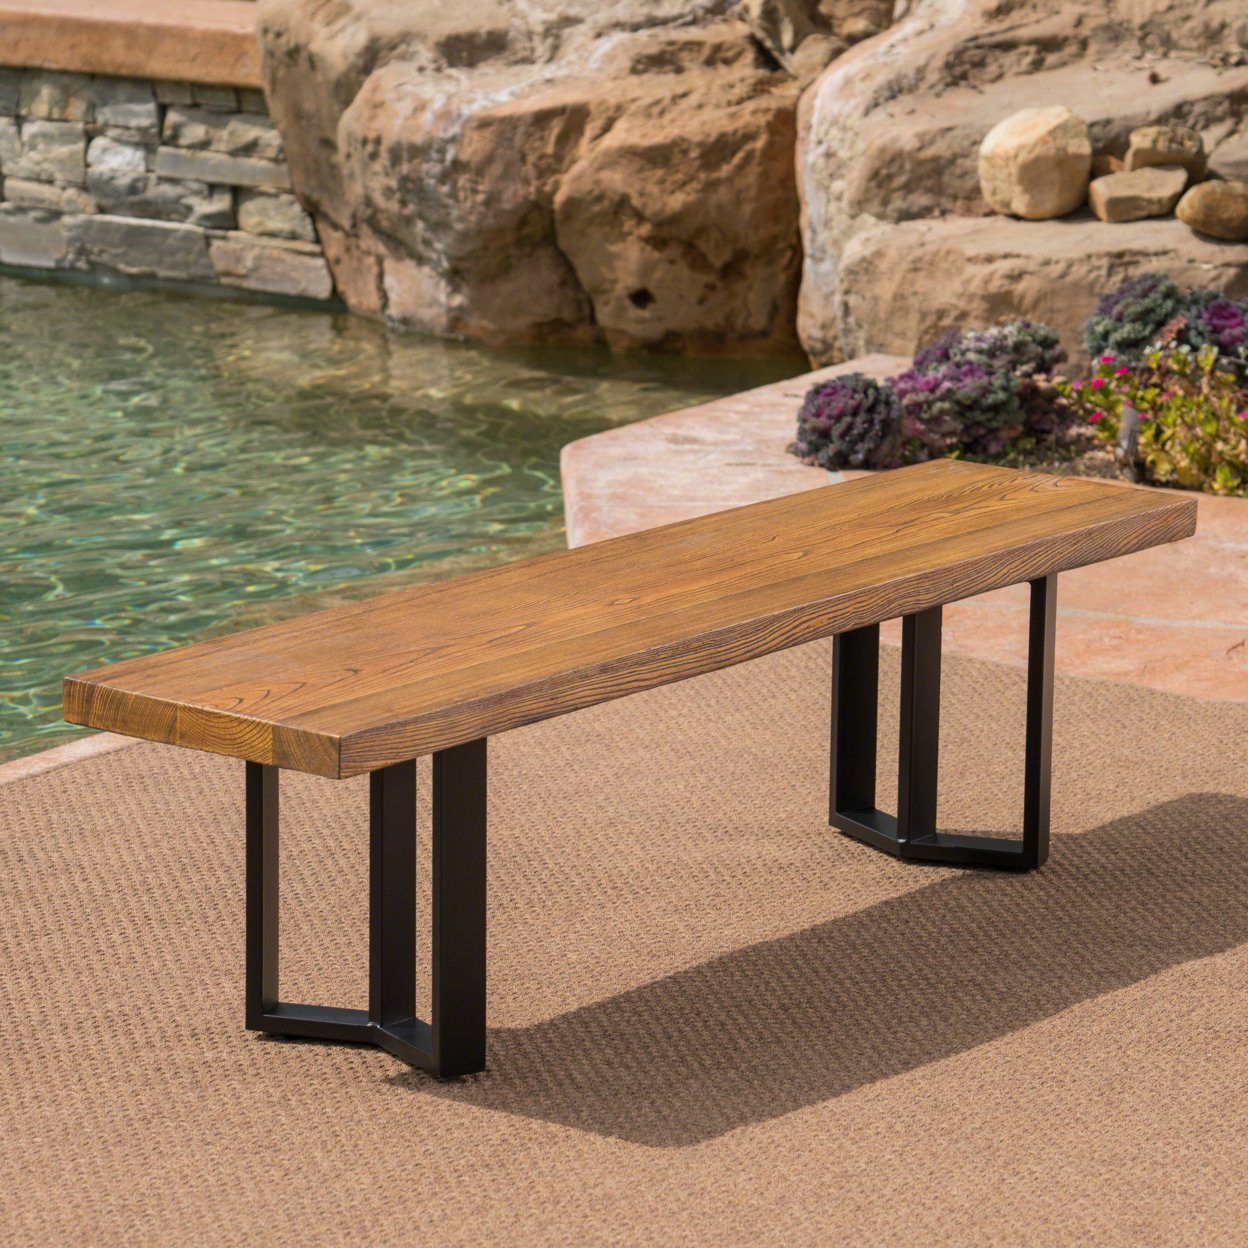 Santa Rosa Outdoor Finish Light Weight Concrete Dining Bench - Textured Brown